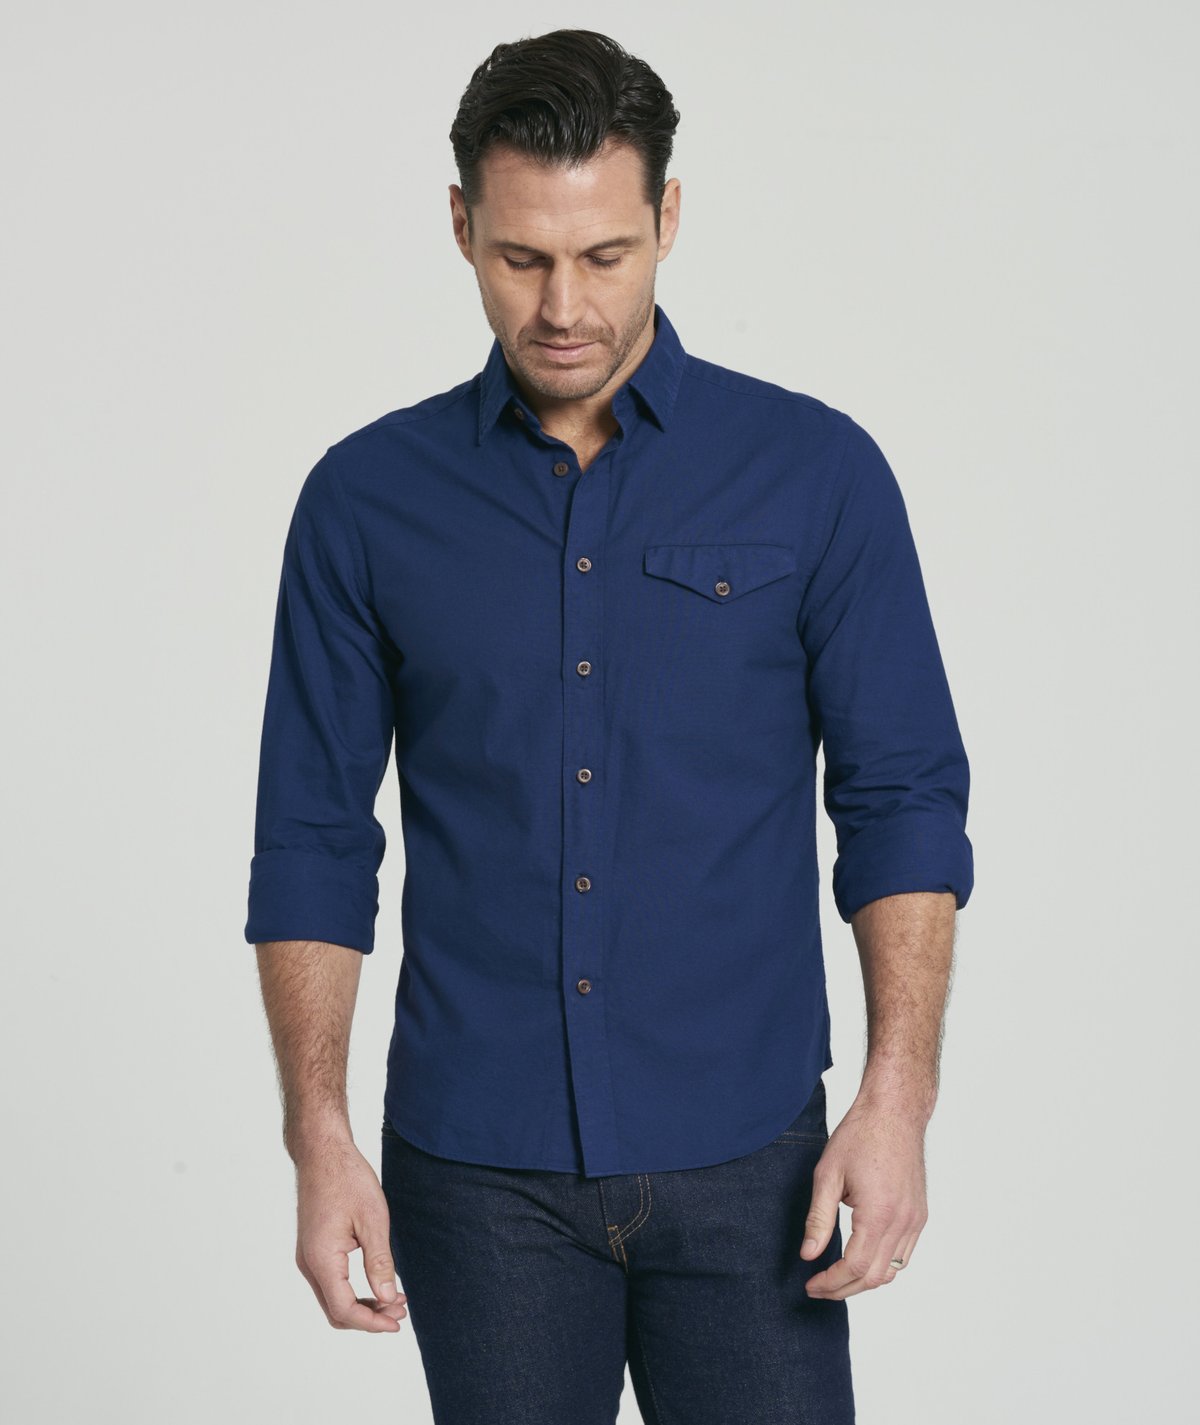 Concealed Carry Shirts for the Tactical Gentleman by UNTUCKit? • Spotter Up